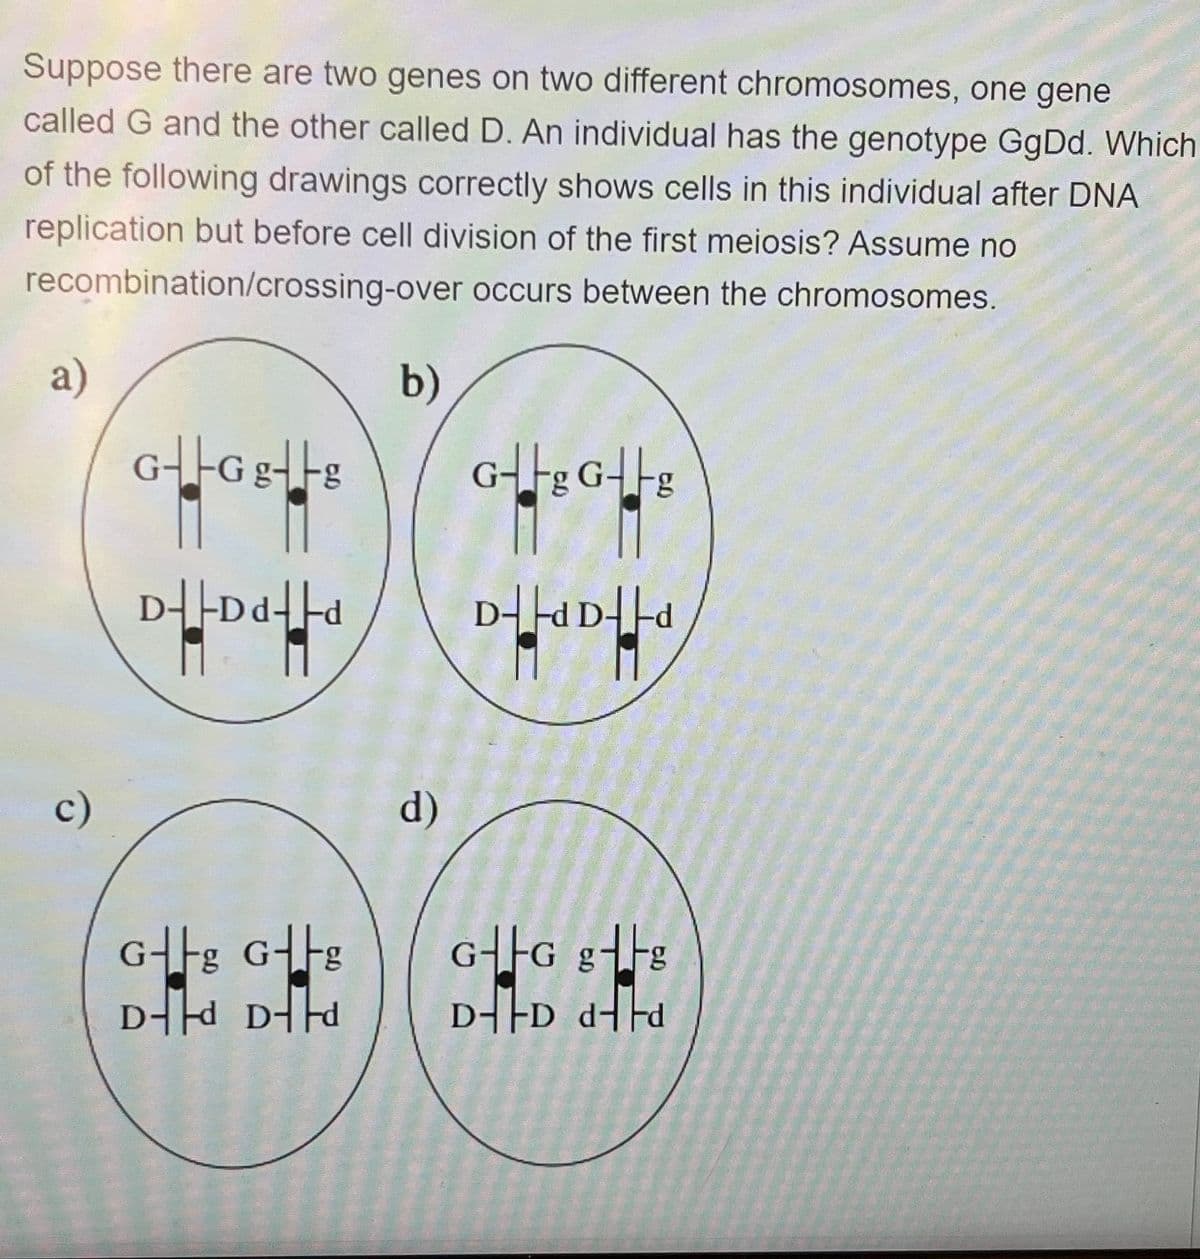 Suppose there are two genes on two different chromosomes, one gene
called G and the other called D. An individual has the genotype GgDd. Which
of the following drawings correctly shows cells in this individual after DNA
replication but before cell division of the first meiosis? Assume no
recombination/crossing-over occurs between the chromosomes.
a)
G|GgTg
11
11
D--Da-d
1 N
Gg Gg
D-d Dd
b)
d)
G+gGg
7/2007
D-d D-d
GG gtg
DD dd